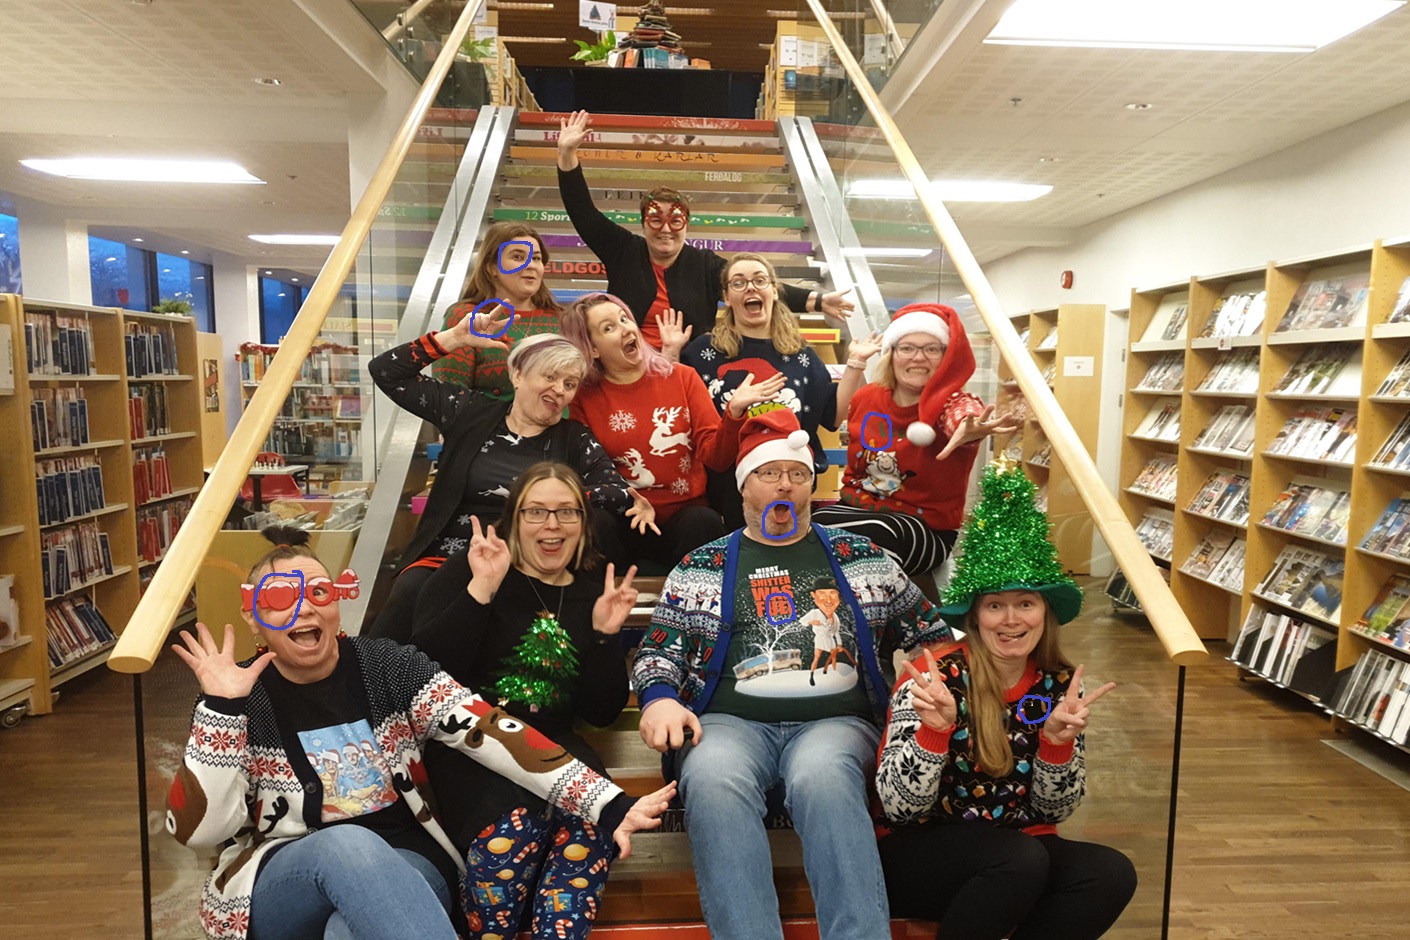 Employees of the library and archive museum sitting and wearing Christmas outfits